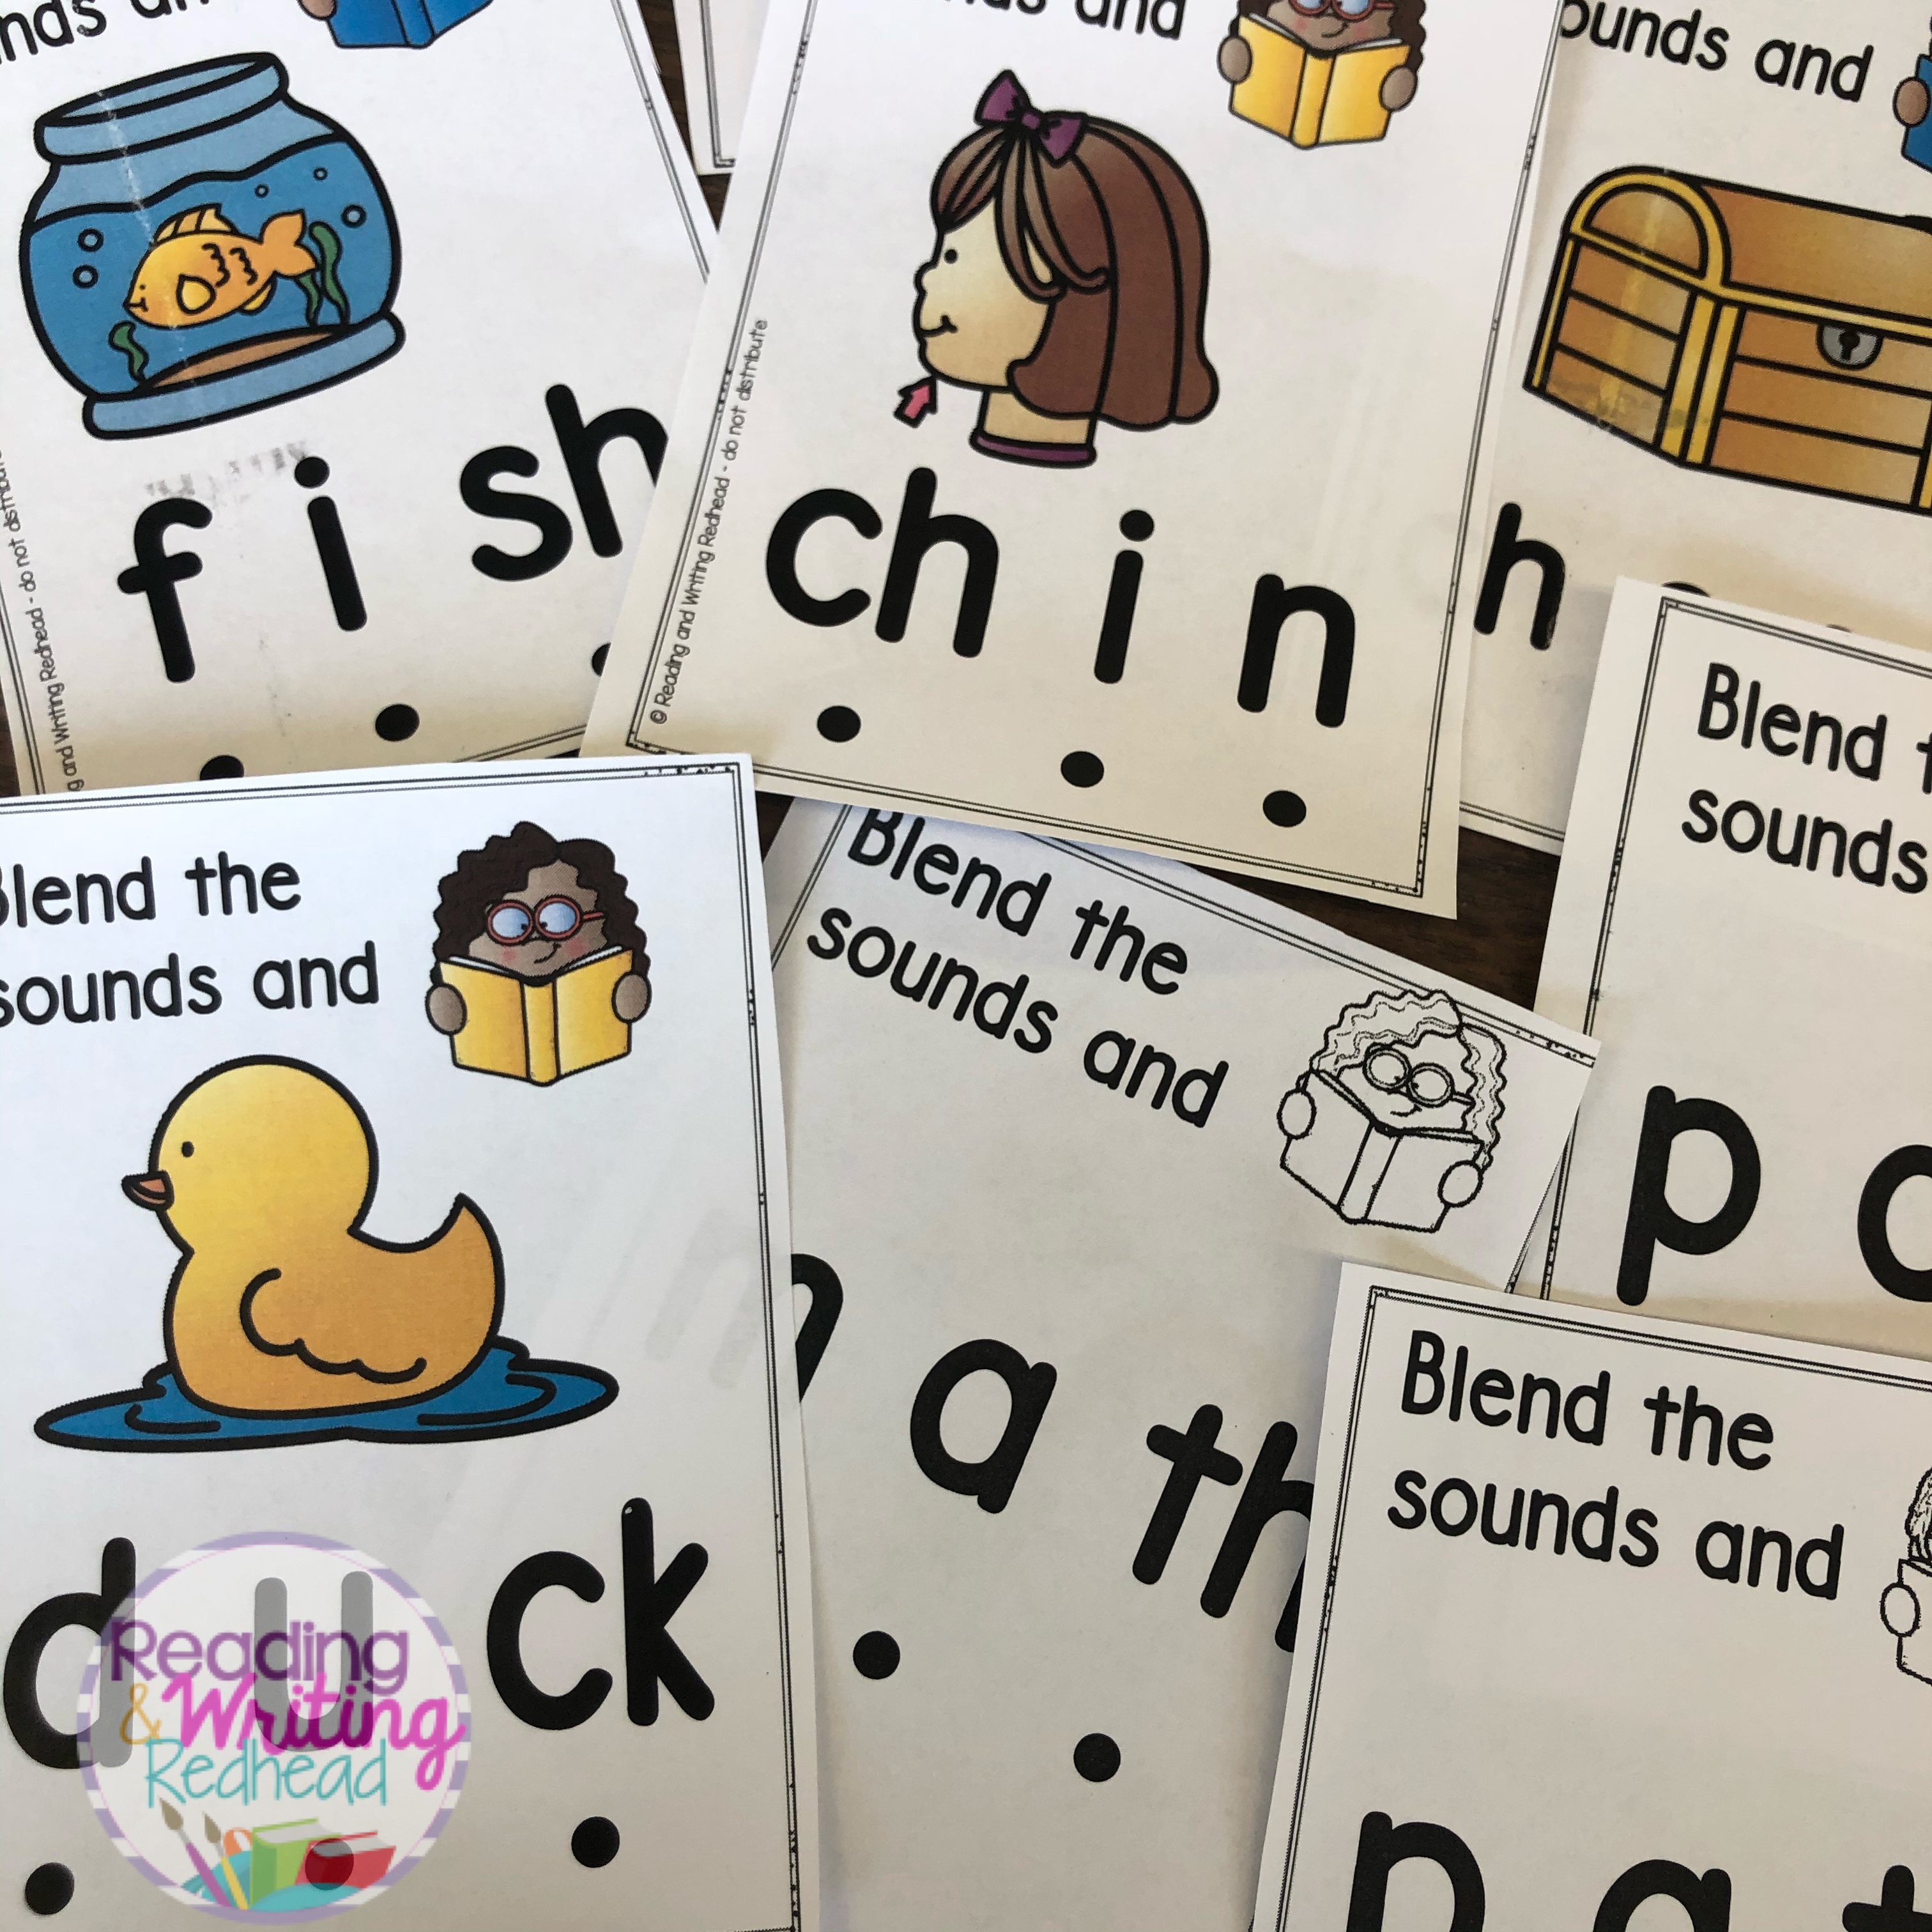 Blend and read words with digraphs